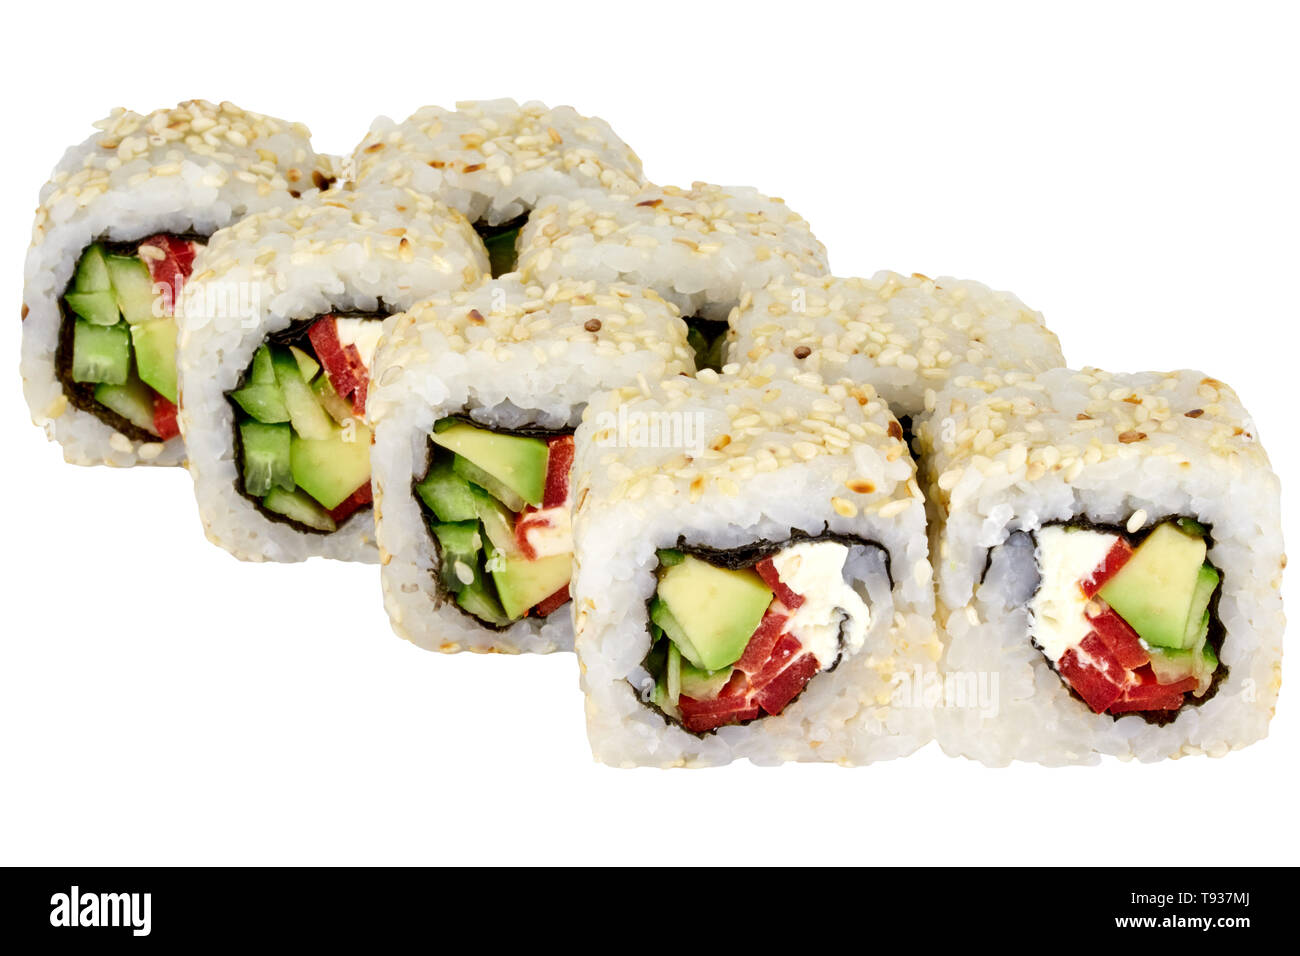 Sushi roll japanese food isolated on white background Philadelphia sushi roll with tuna and cucumber close-up Stock Photo